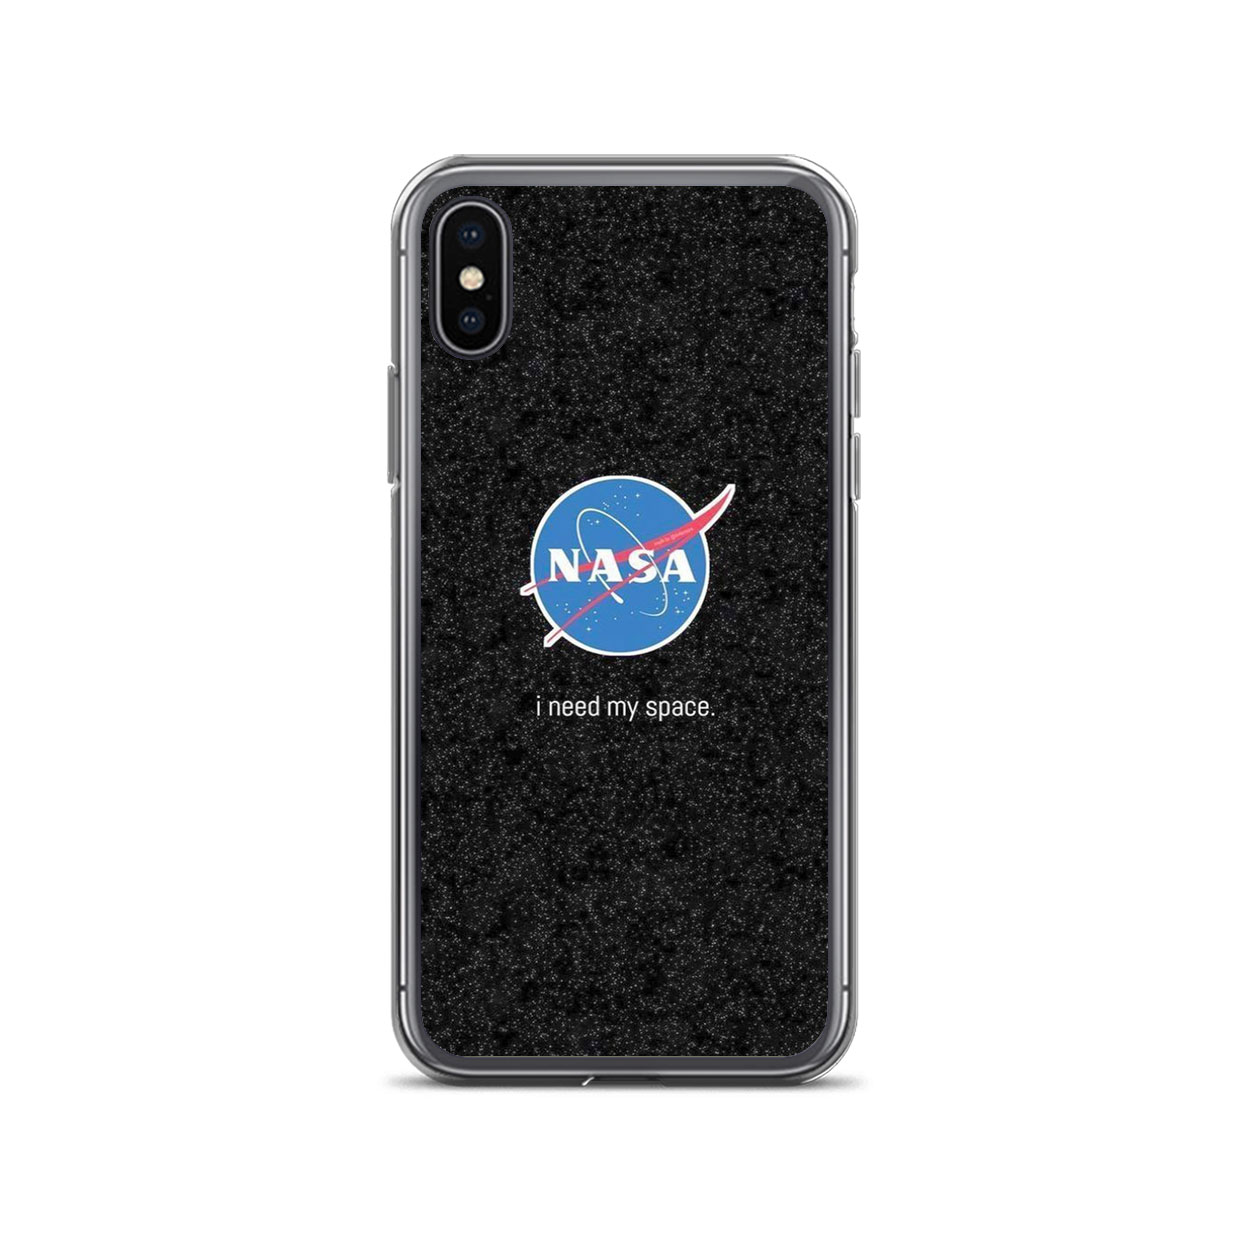 NASA I Need My Space iPhone Case for XS/XS Max,XR,X,8/8 Plus,7/7Plus,6/6S